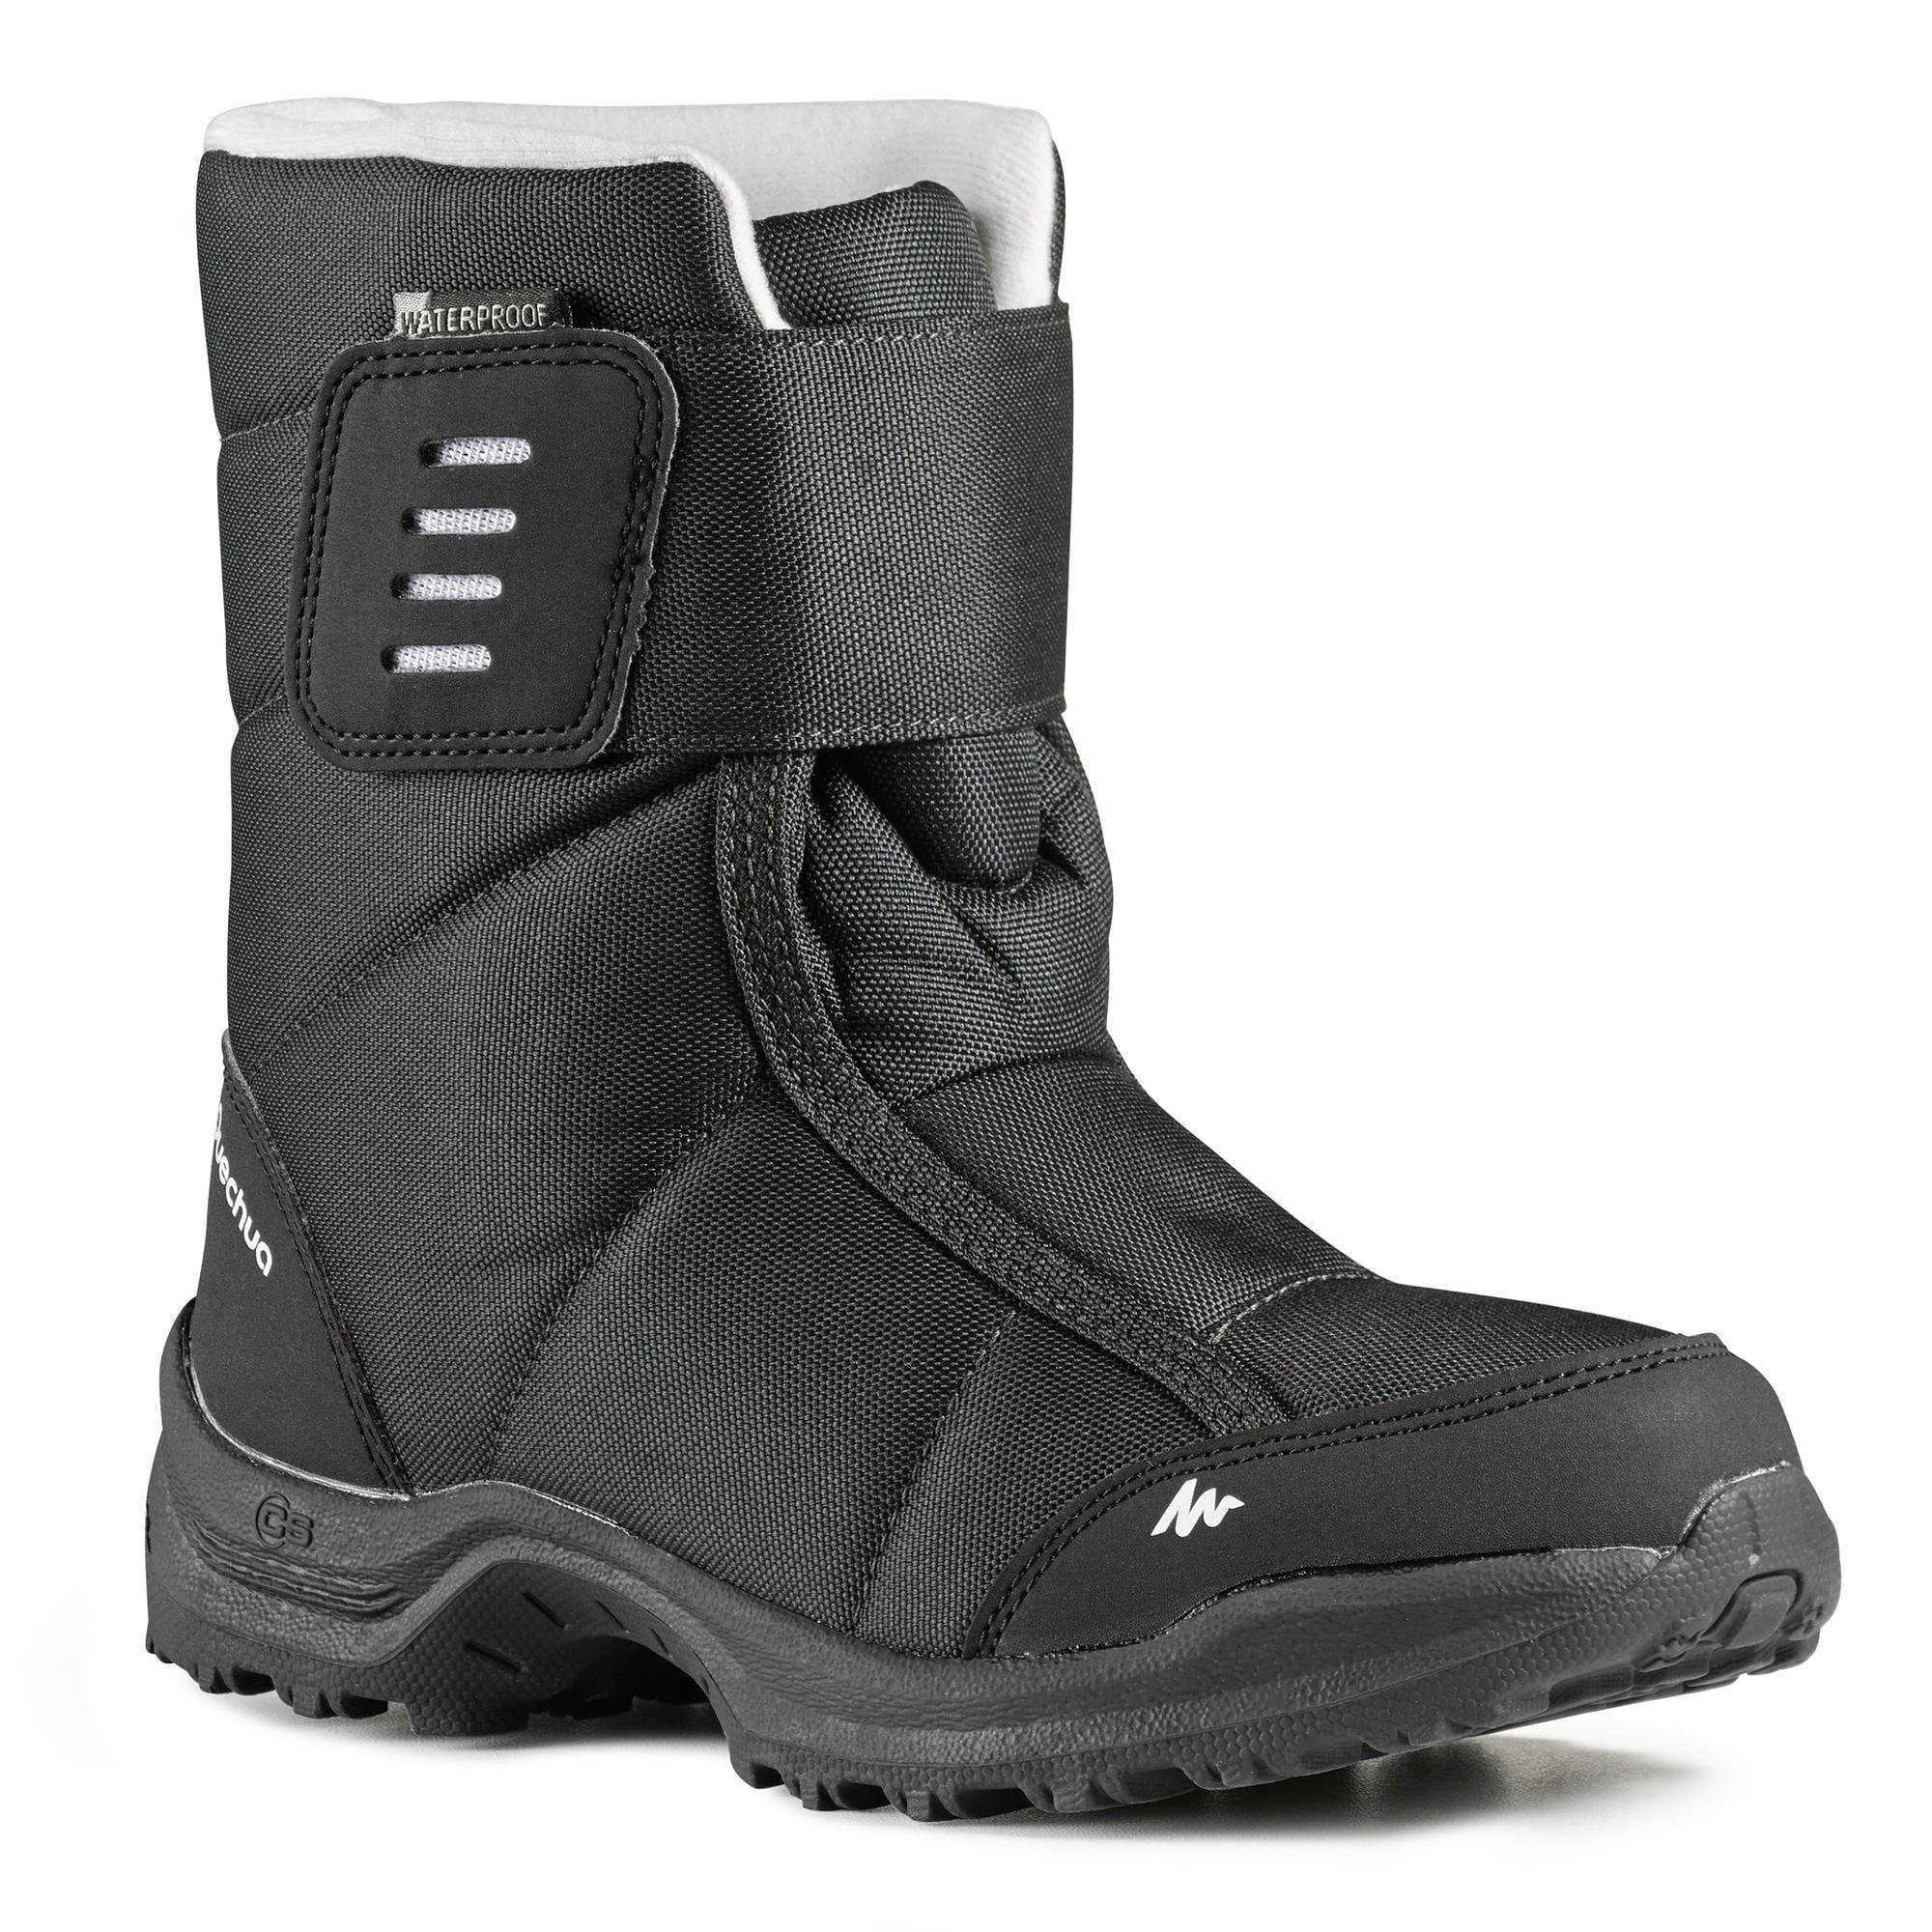 decathlon shoes for snow